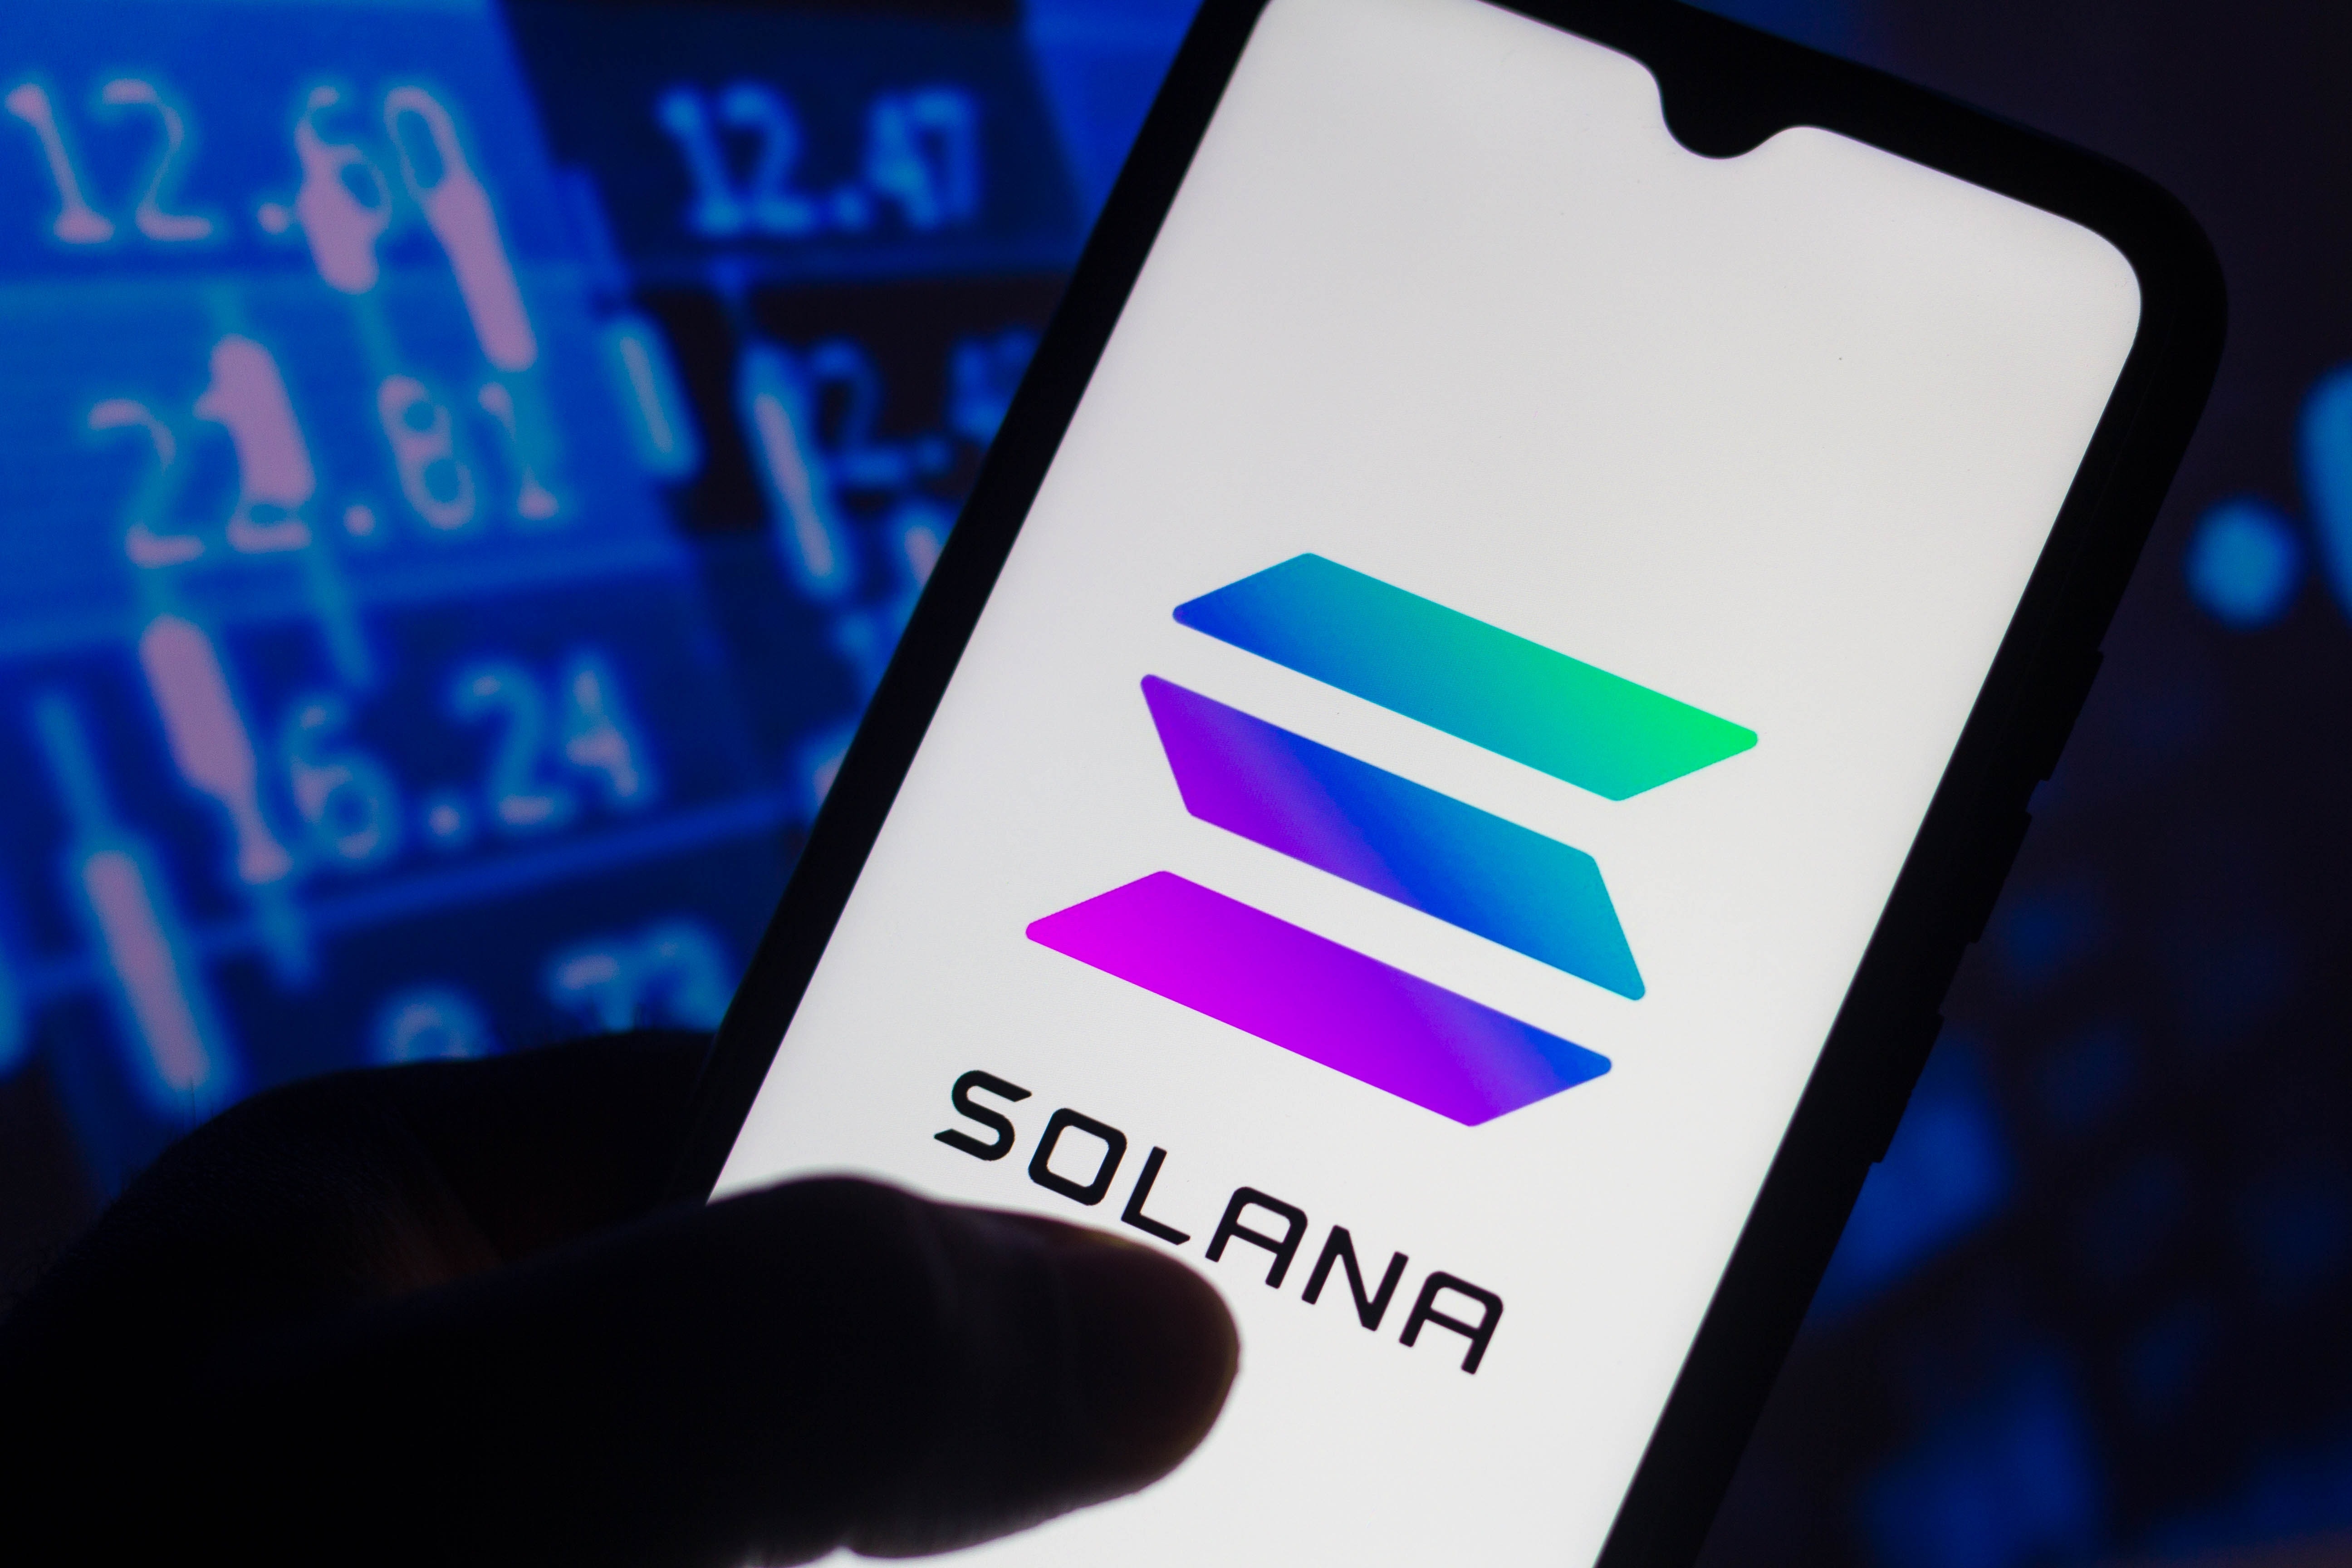 BREAKING: Solana Ecosystem Hack Sees $580M Drained From Private Wallets...So Far